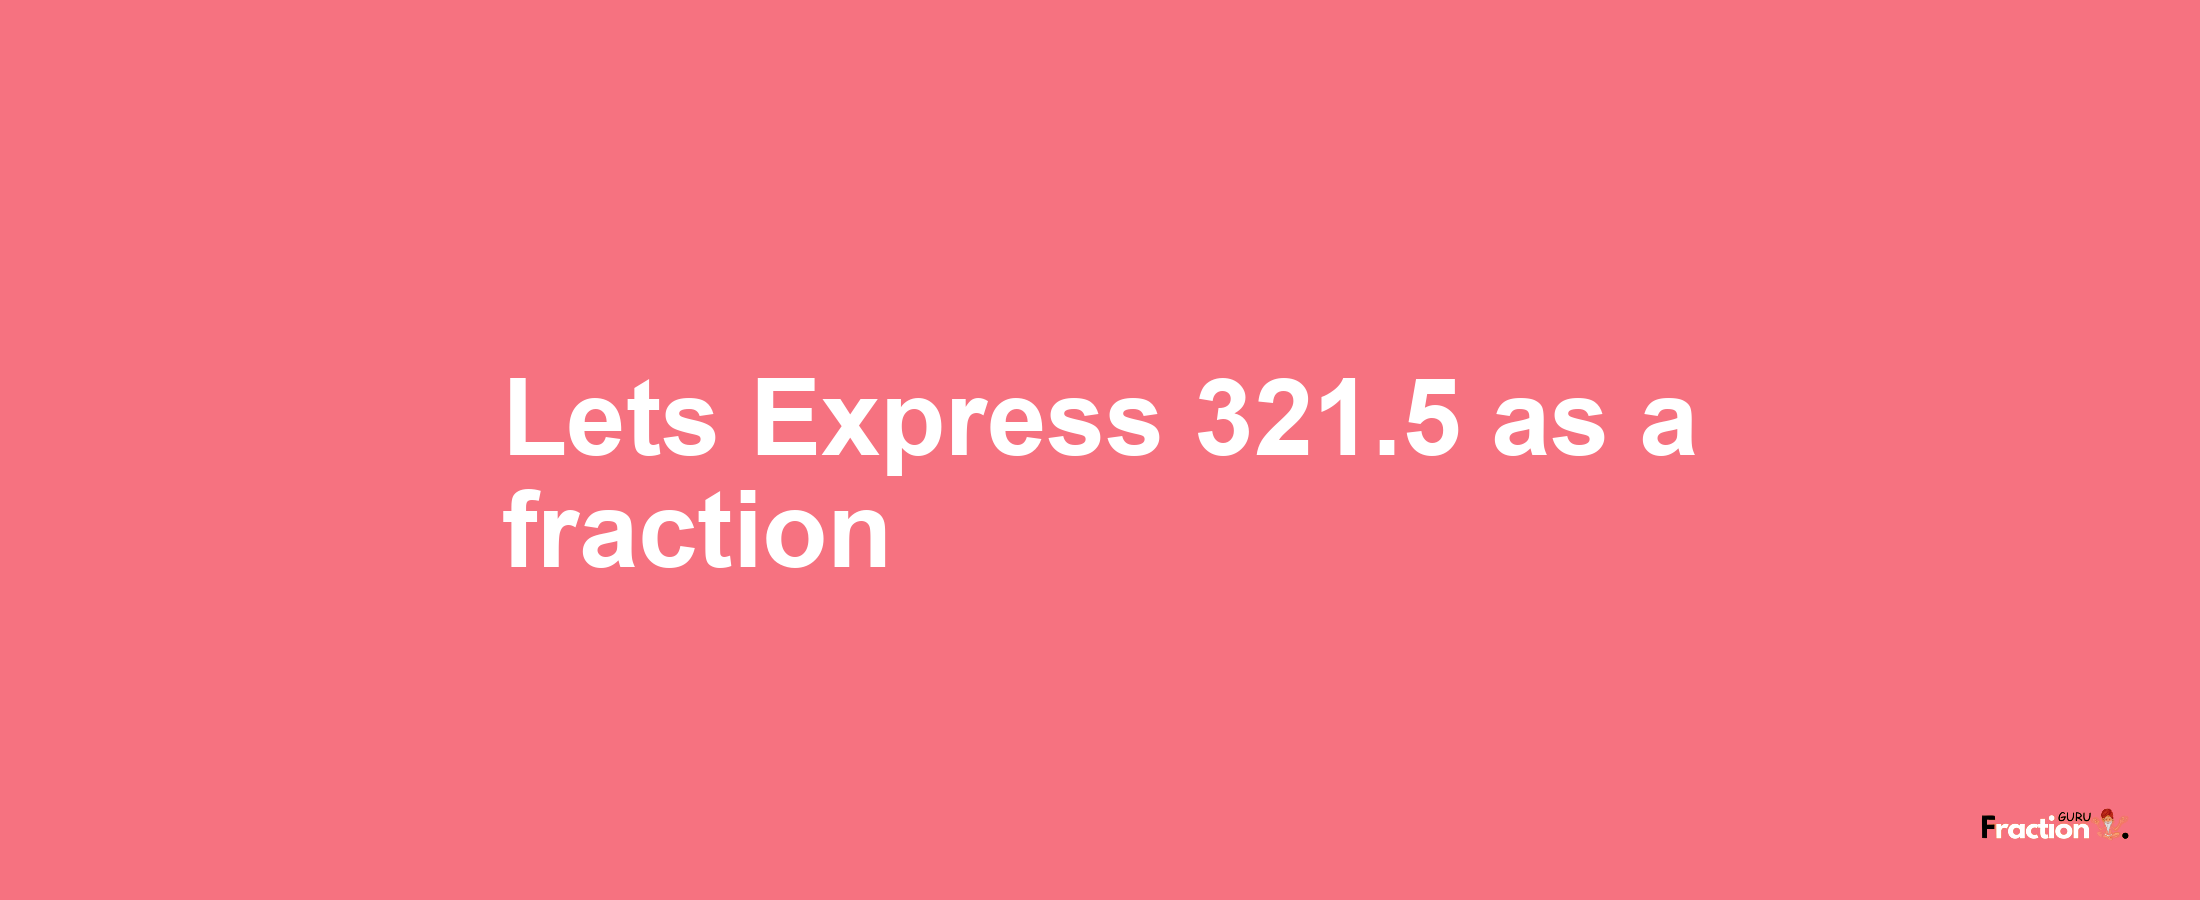 Lets Express 321.5 as afraction